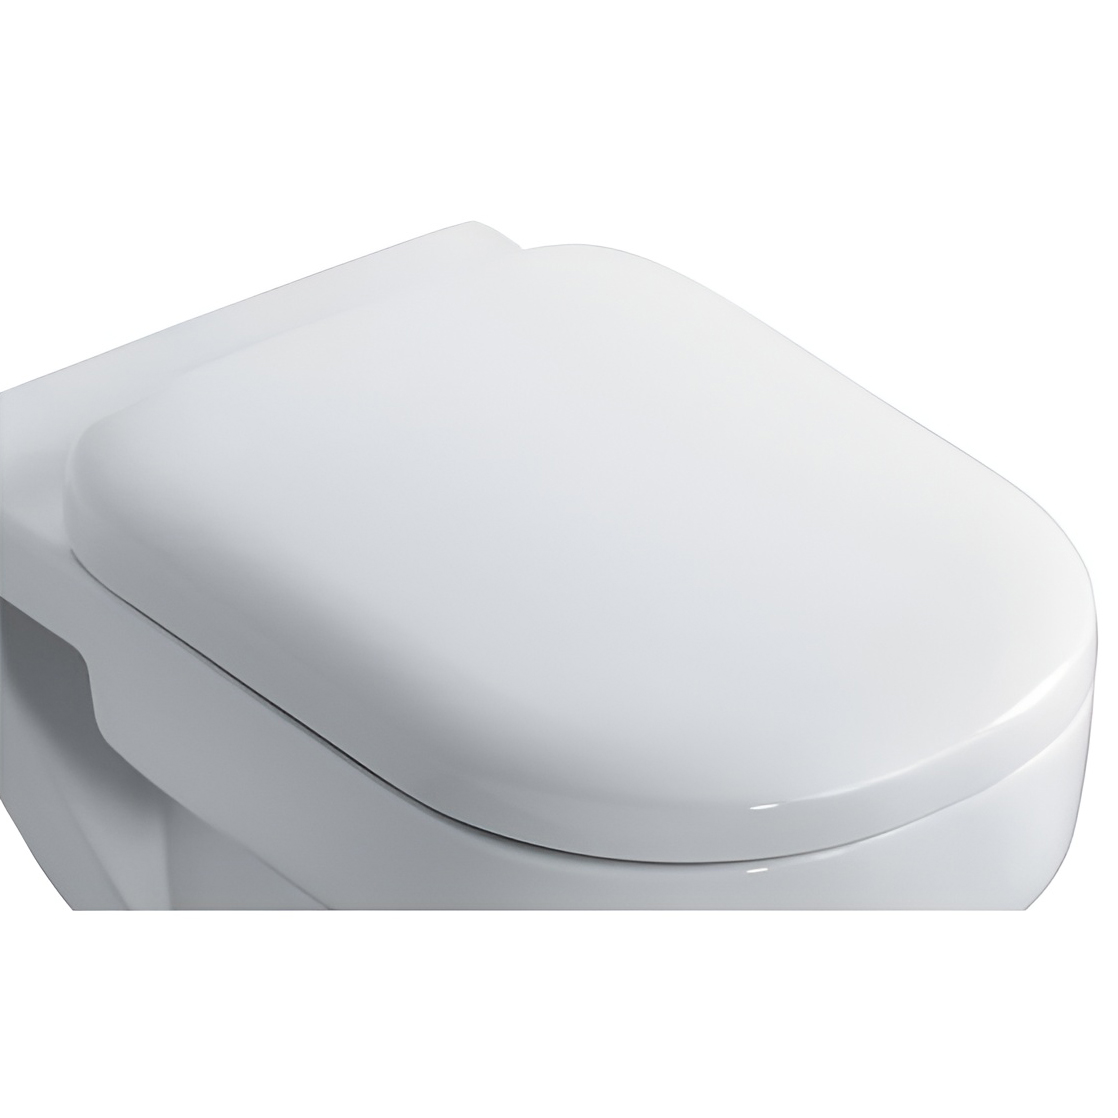 Ideal Standard Playa White Toilet Seat And Cover.